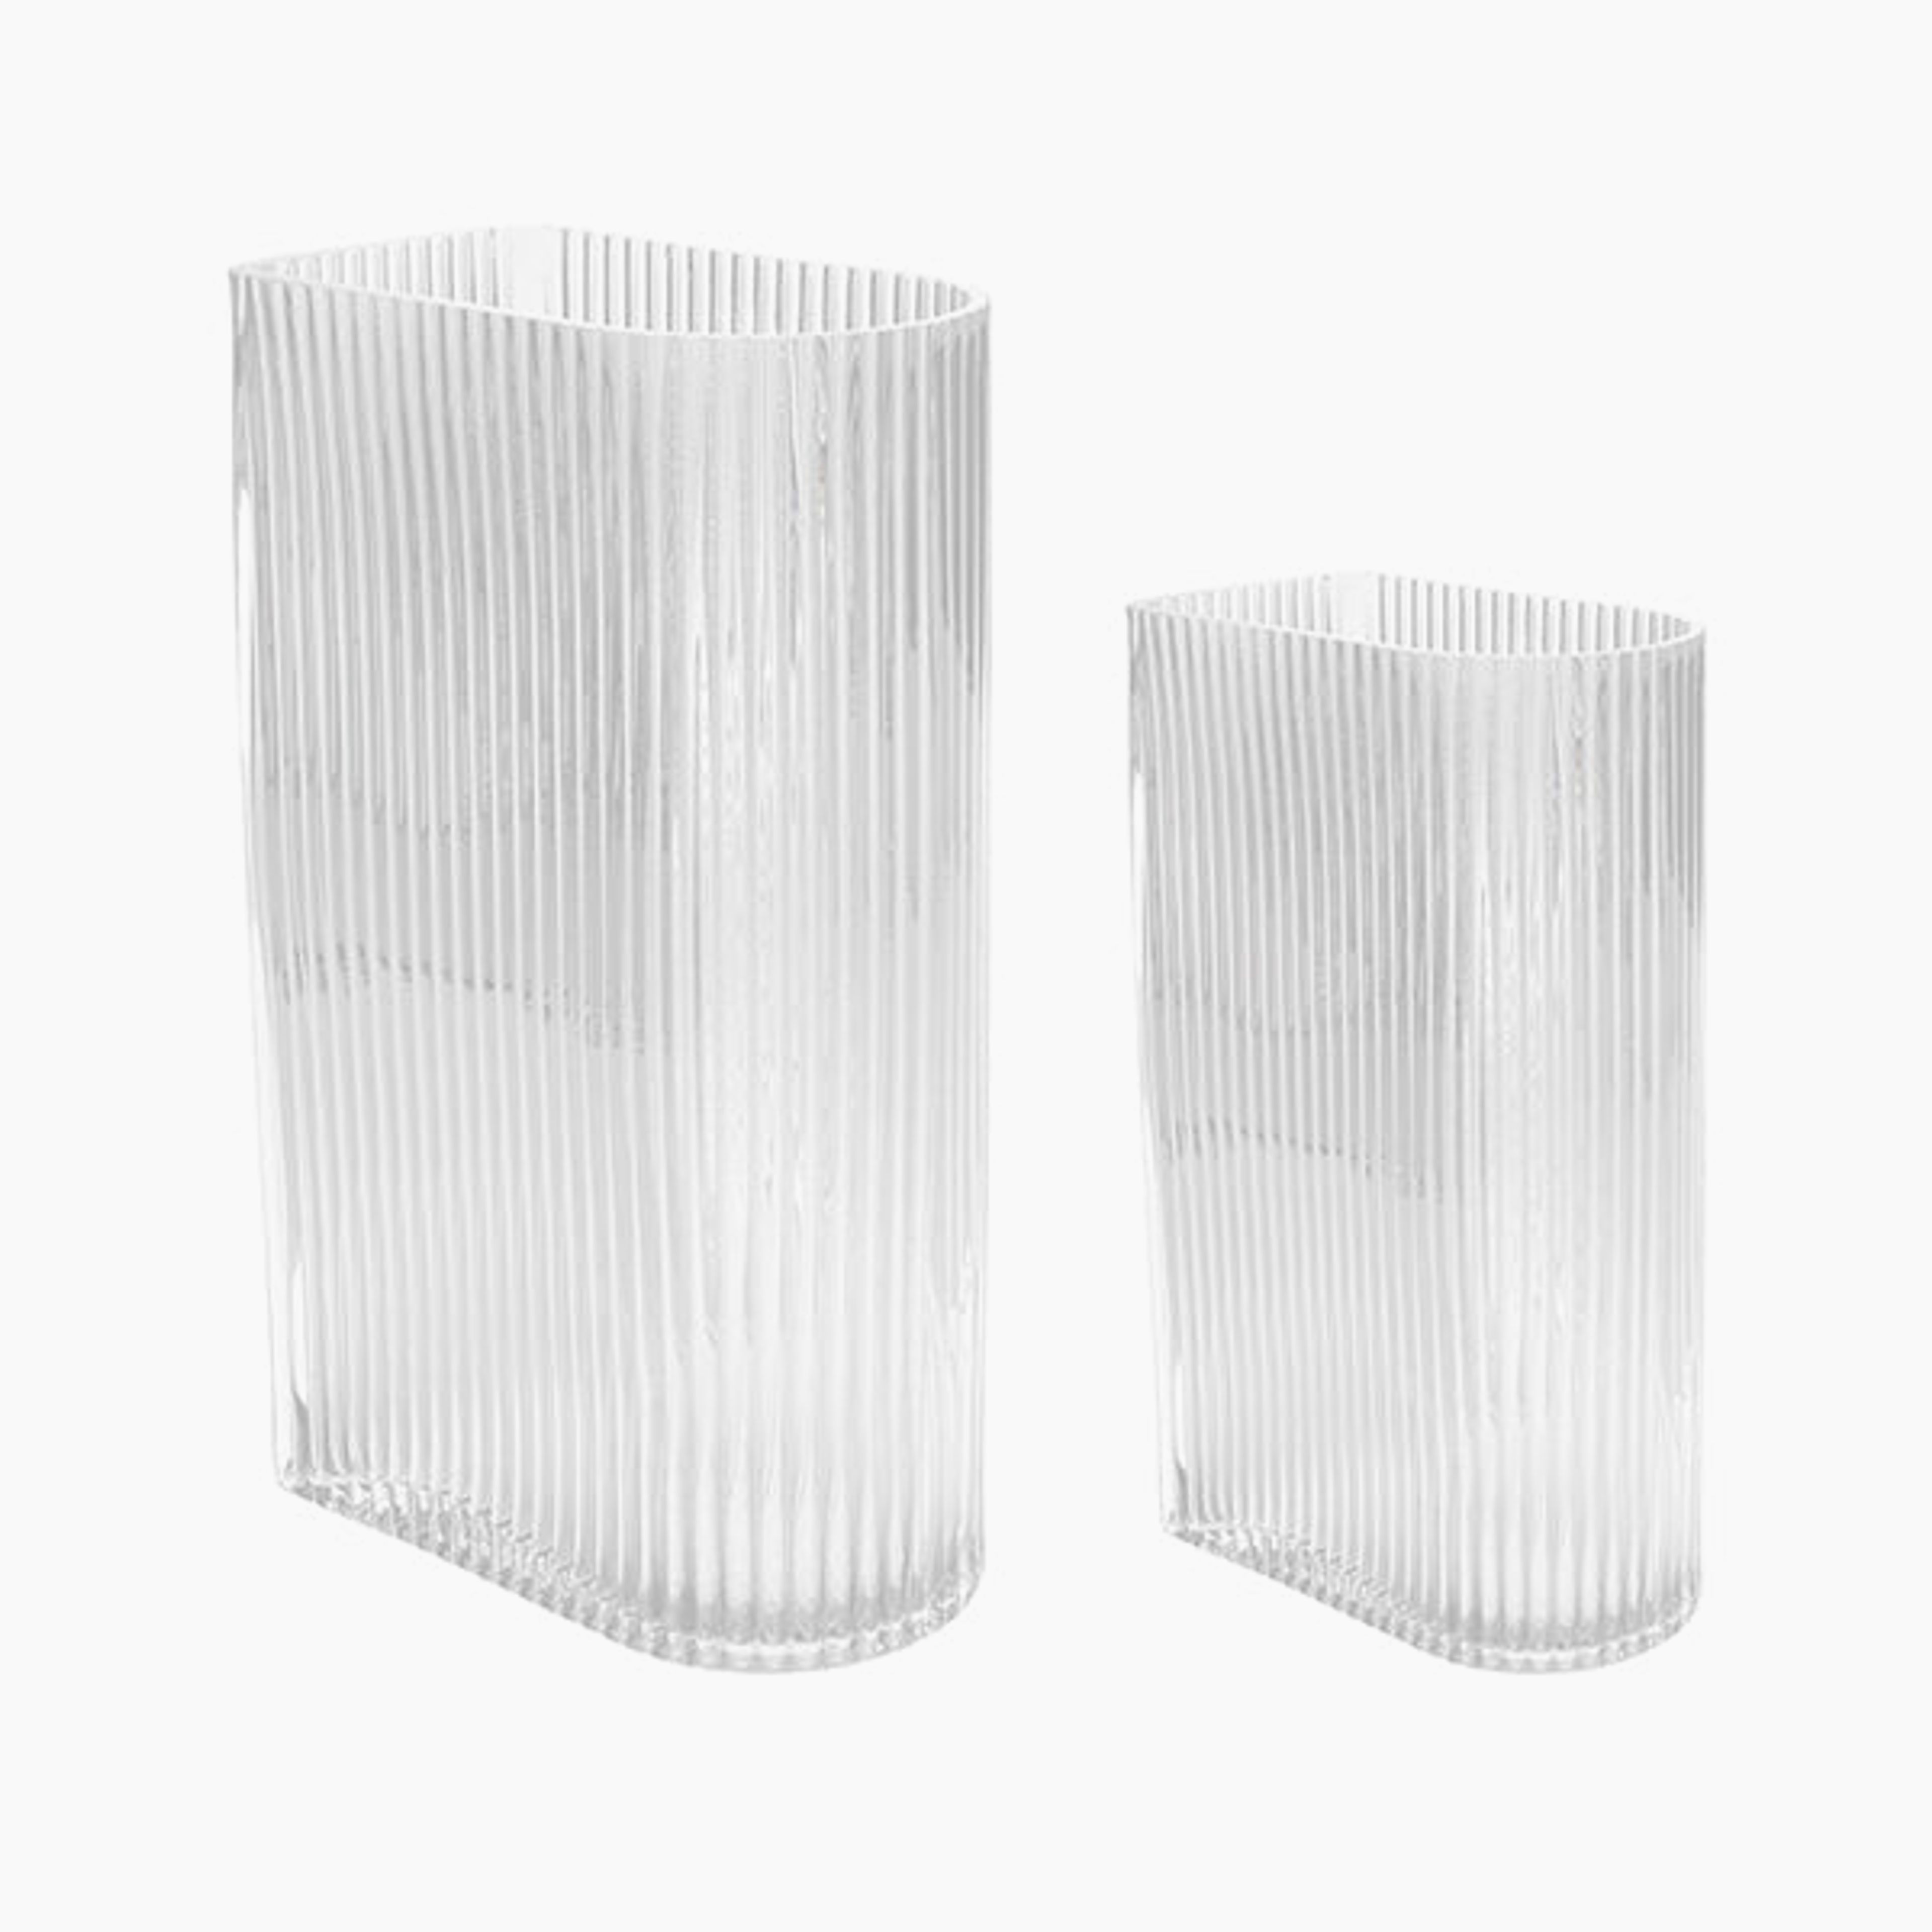 Clear ribbed vases - set of 2